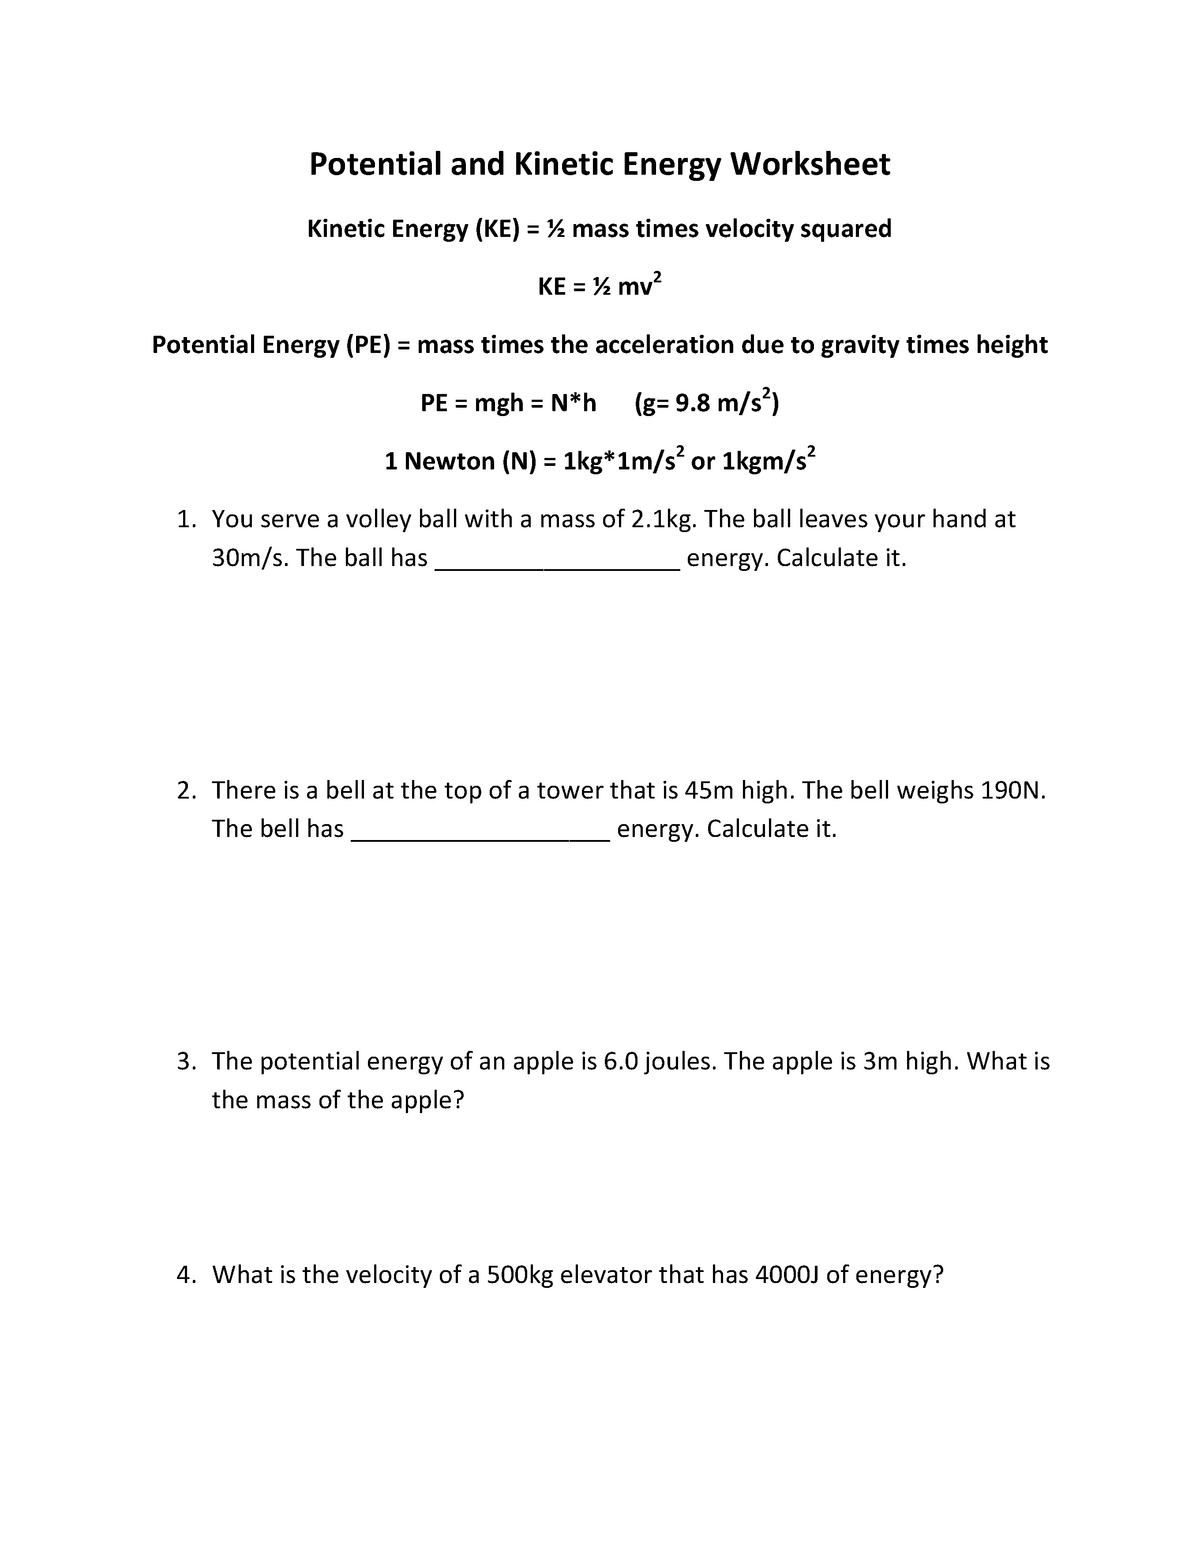 Potential and Kinetic Energy Worksheet - science - 20 - UAEU Within Potential And Kinetic Energy Worksheet